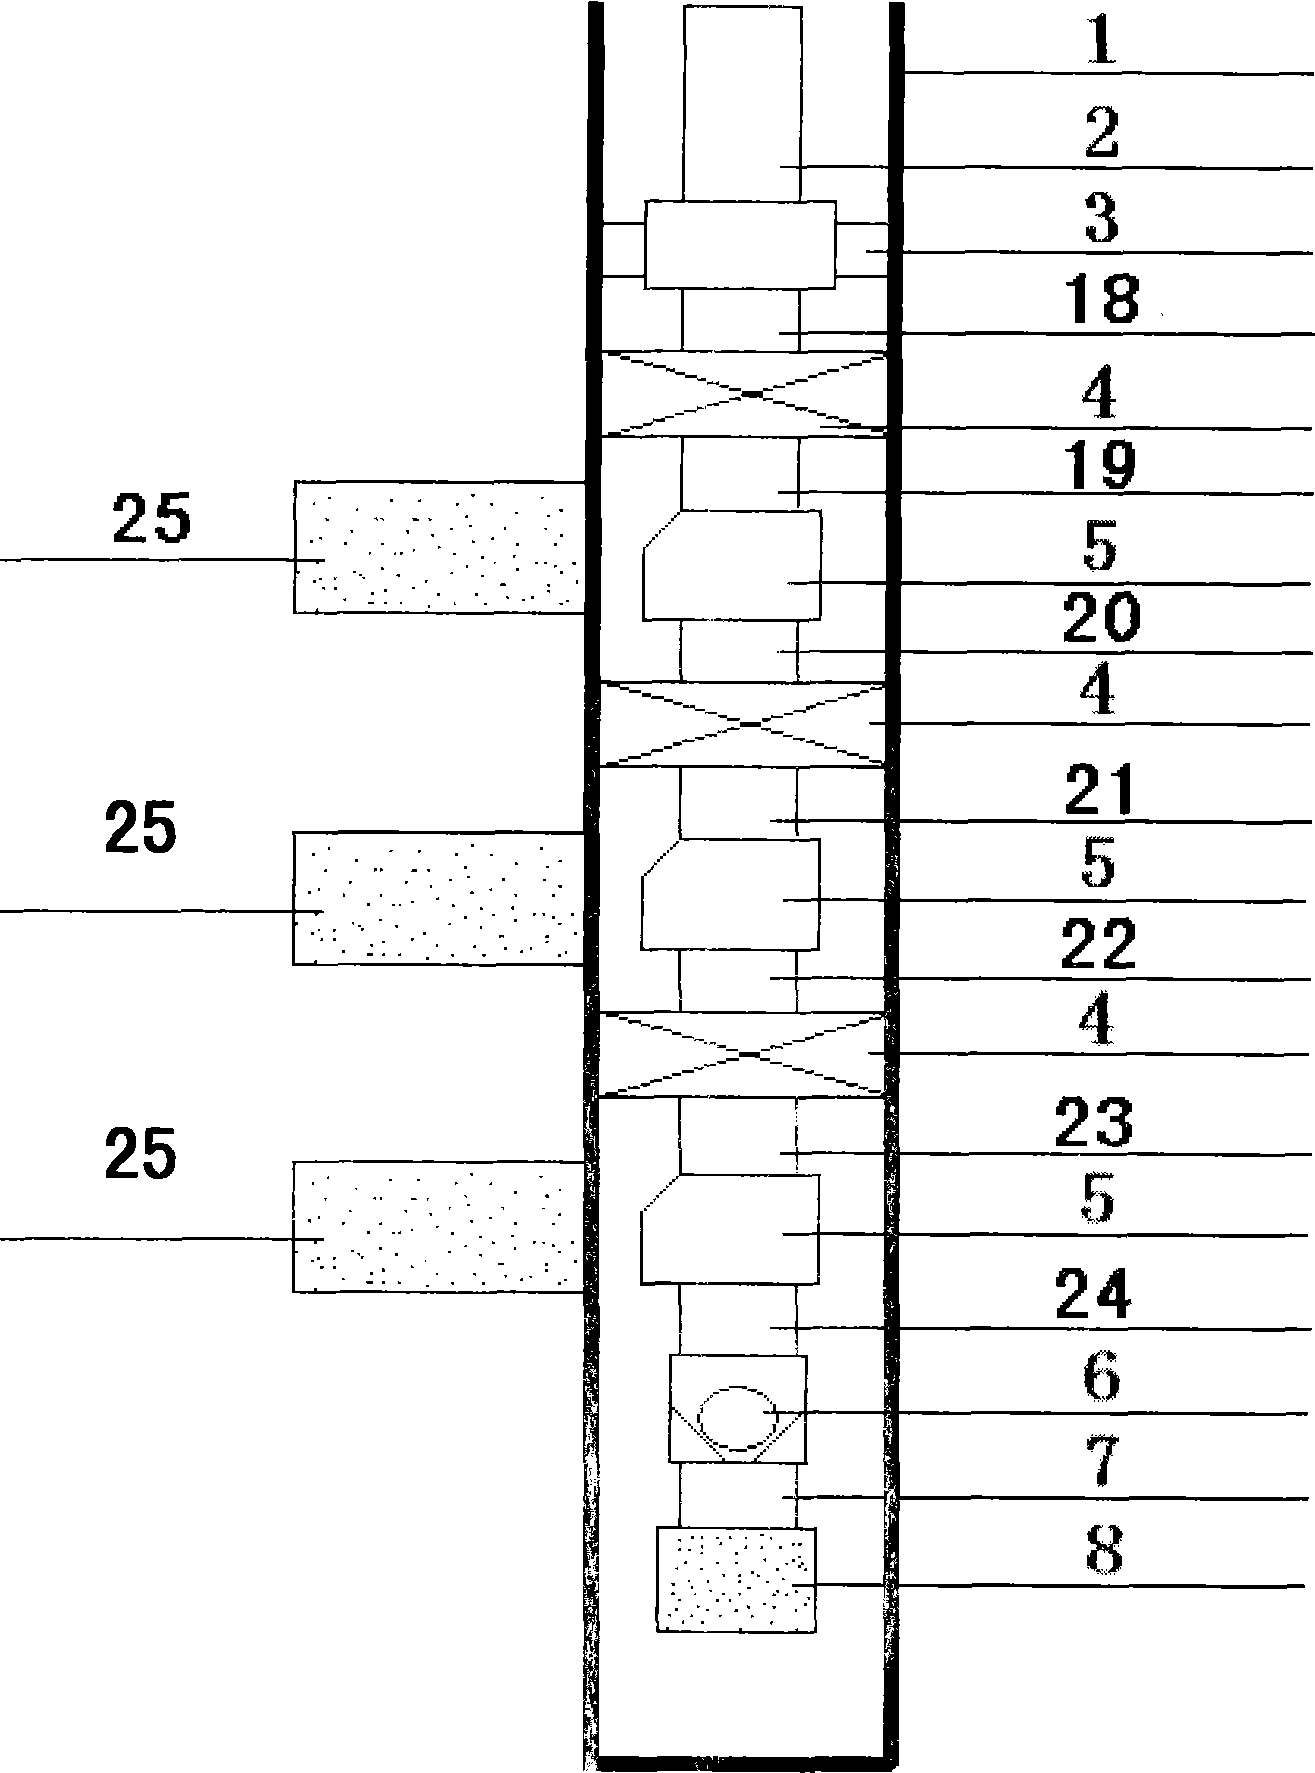 Method for water distribution by sound wave remote control